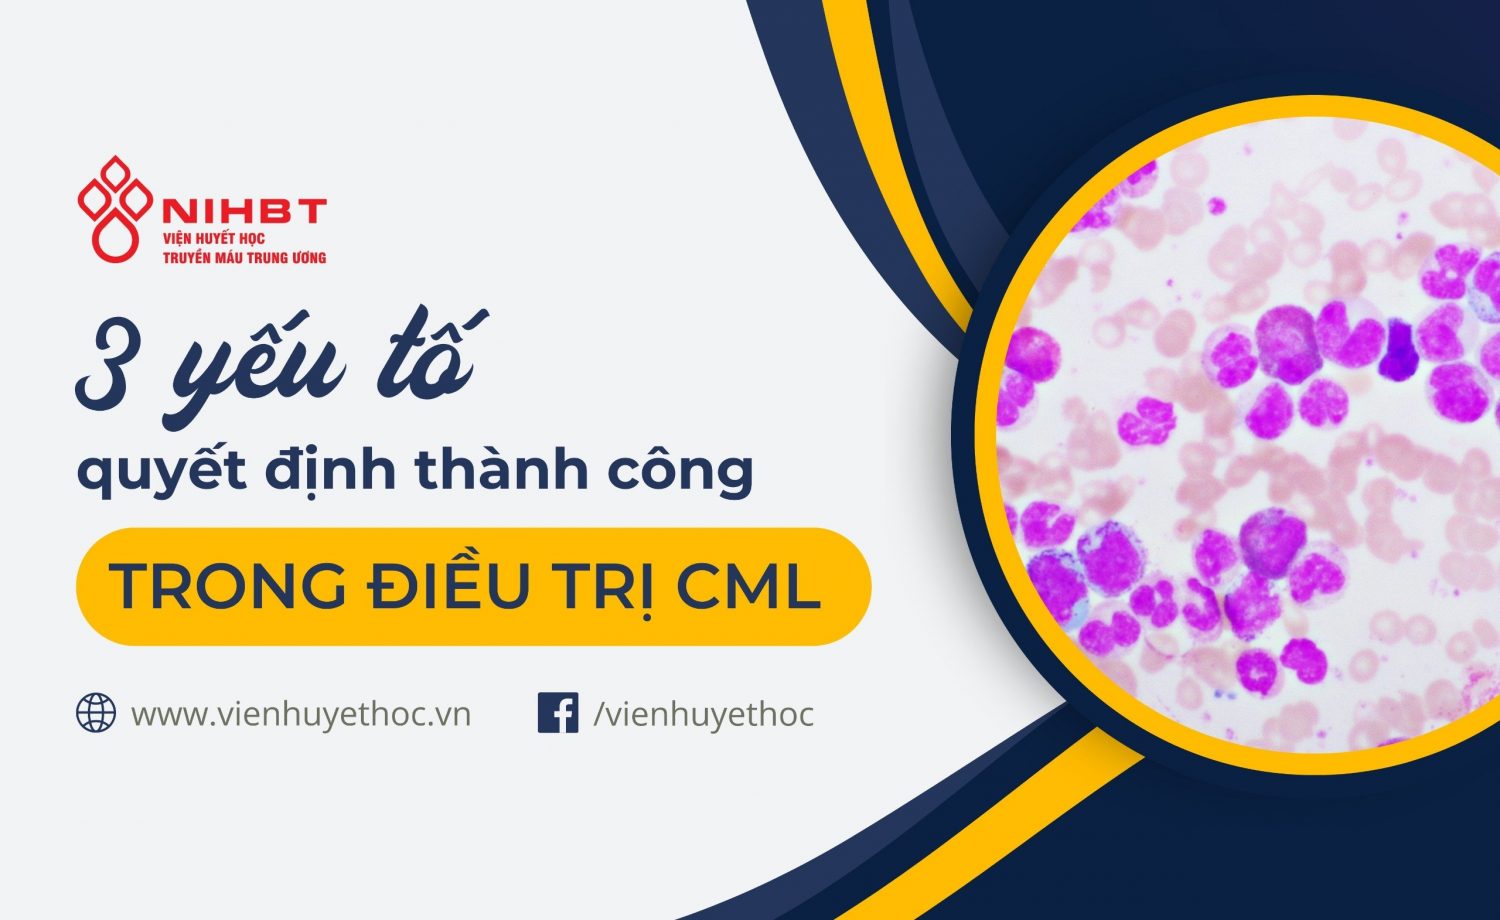 Yeu to quyet dinh thanh cong dieu tri CML (1)